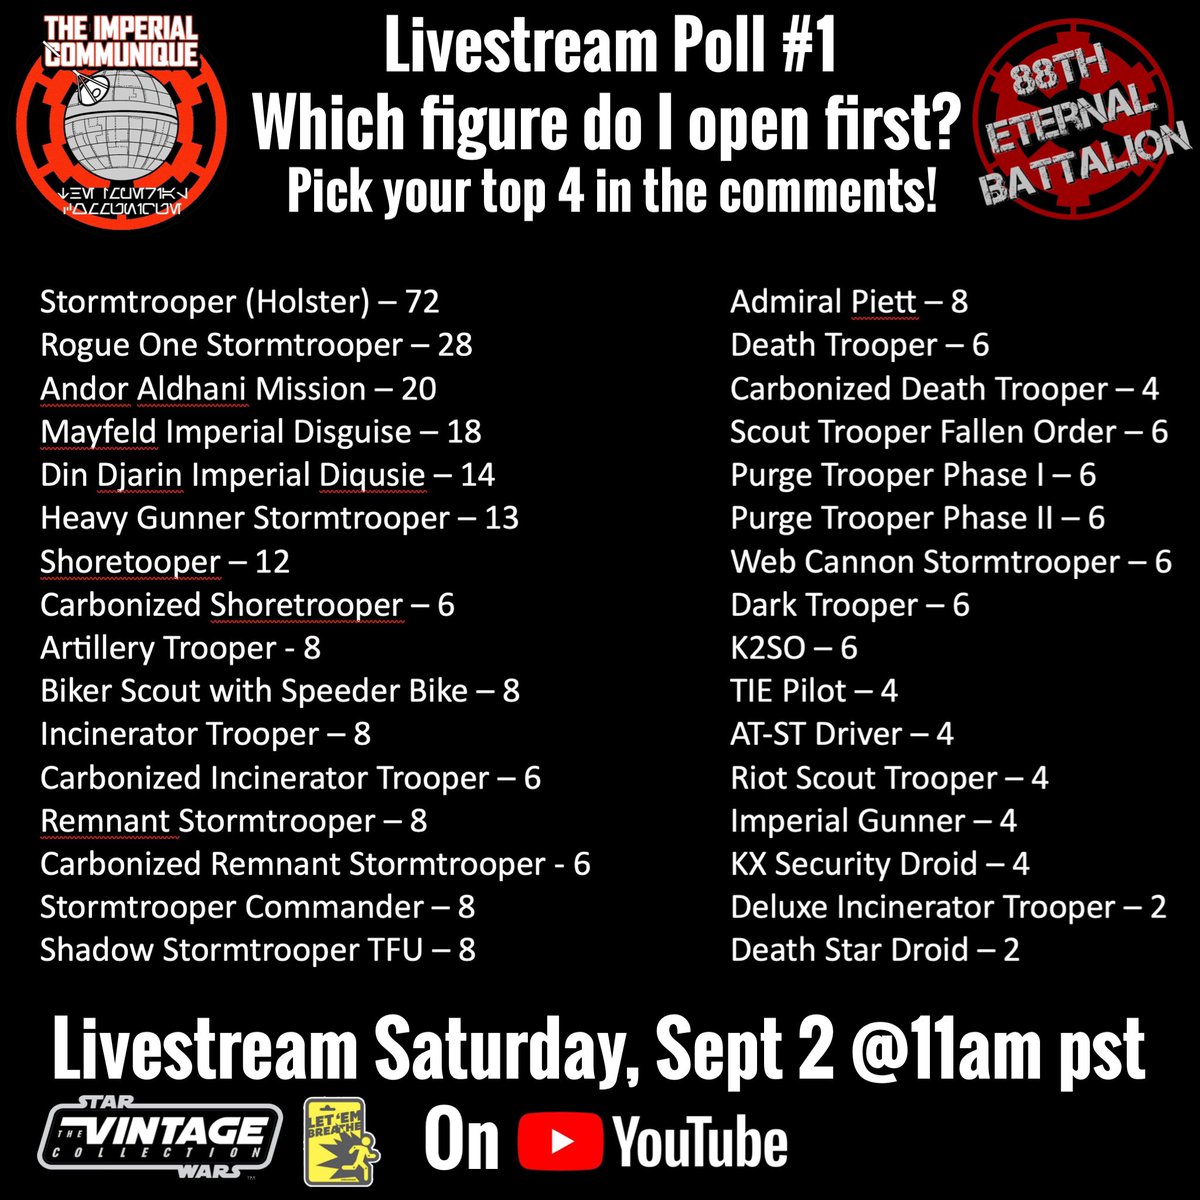 #StarWars #TVC #Hasbro #Kenner #BackTVC #Save375 #FightforTVC #ACTIONFIGURES #Stormtrooper #Toys #Toys4Life #Poll #LiveStream #YouTube #TheMandalorian #TheEmpire #ReturnoftheJedi #StarWarsFan #DarthVader #BikerScout 

Take part in my live stream poll here or IG!!